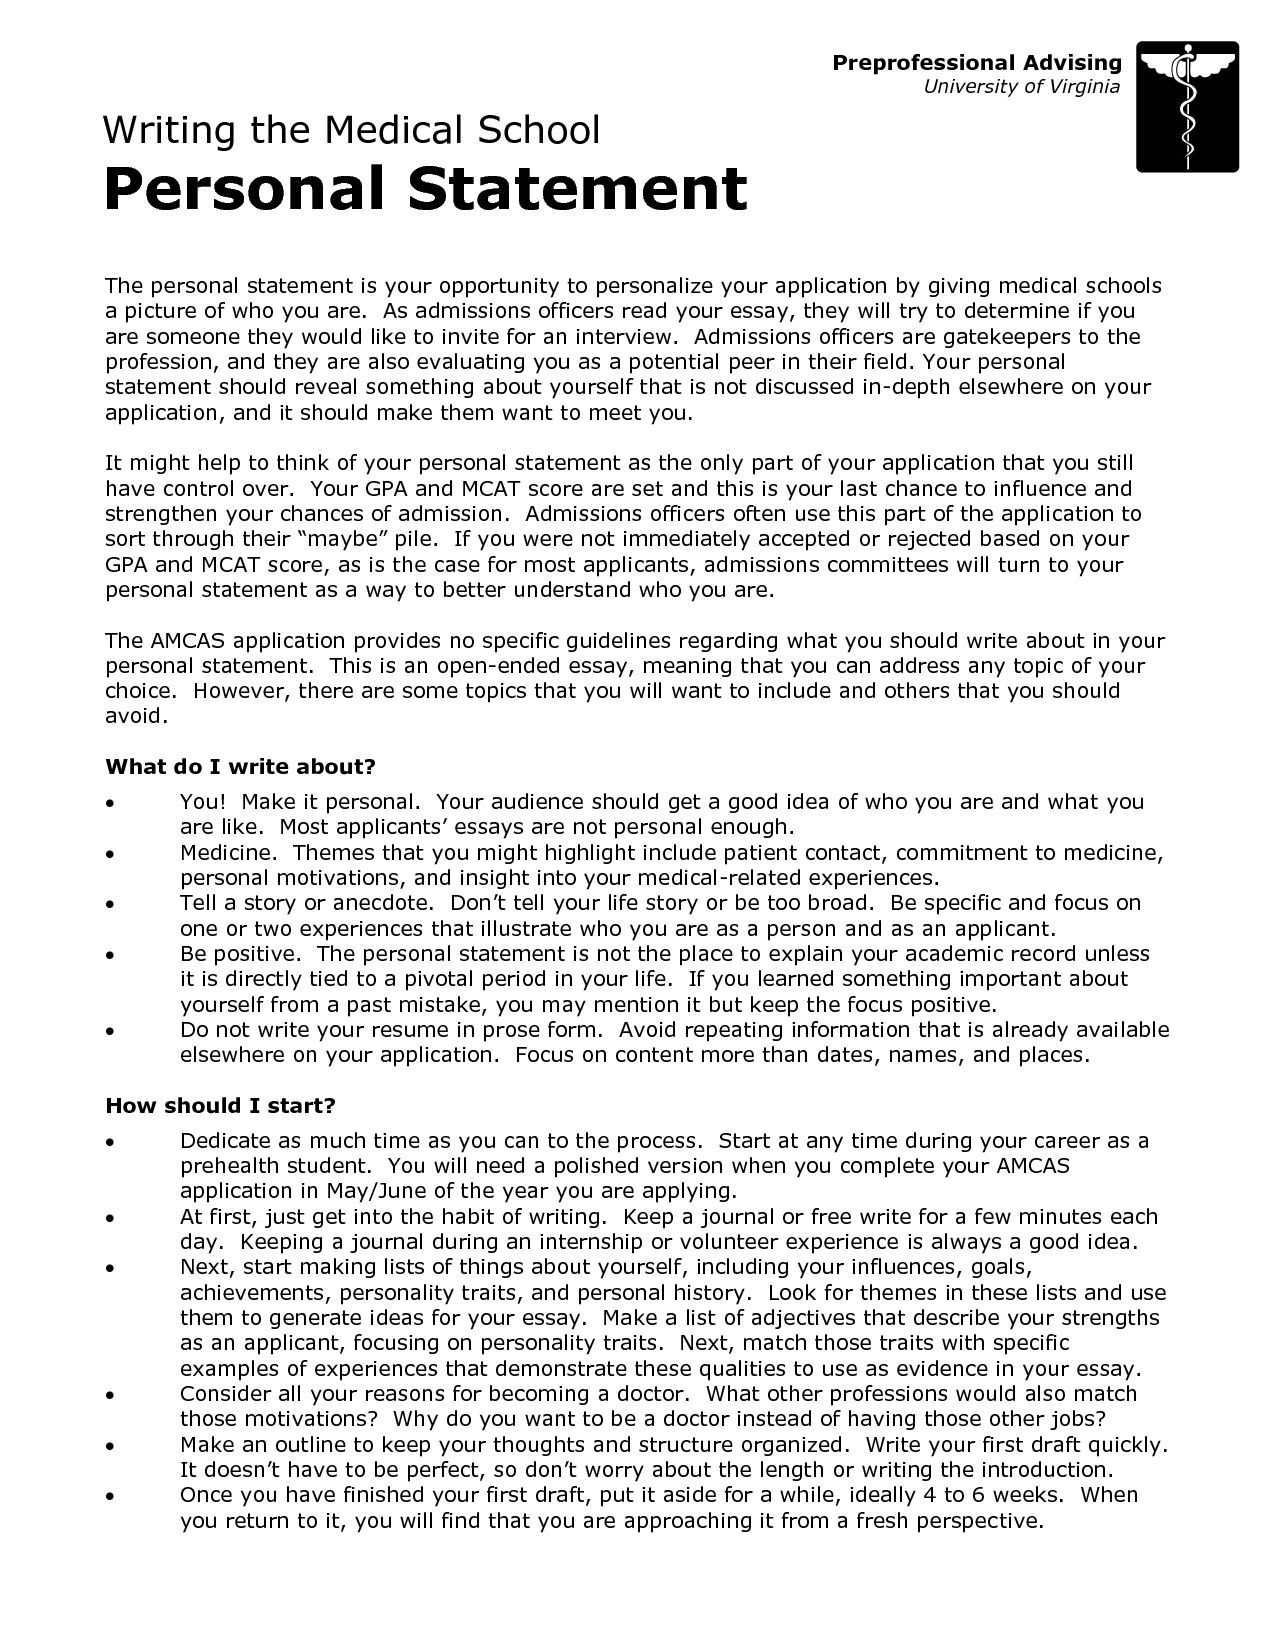 Writing a personal statement for college application